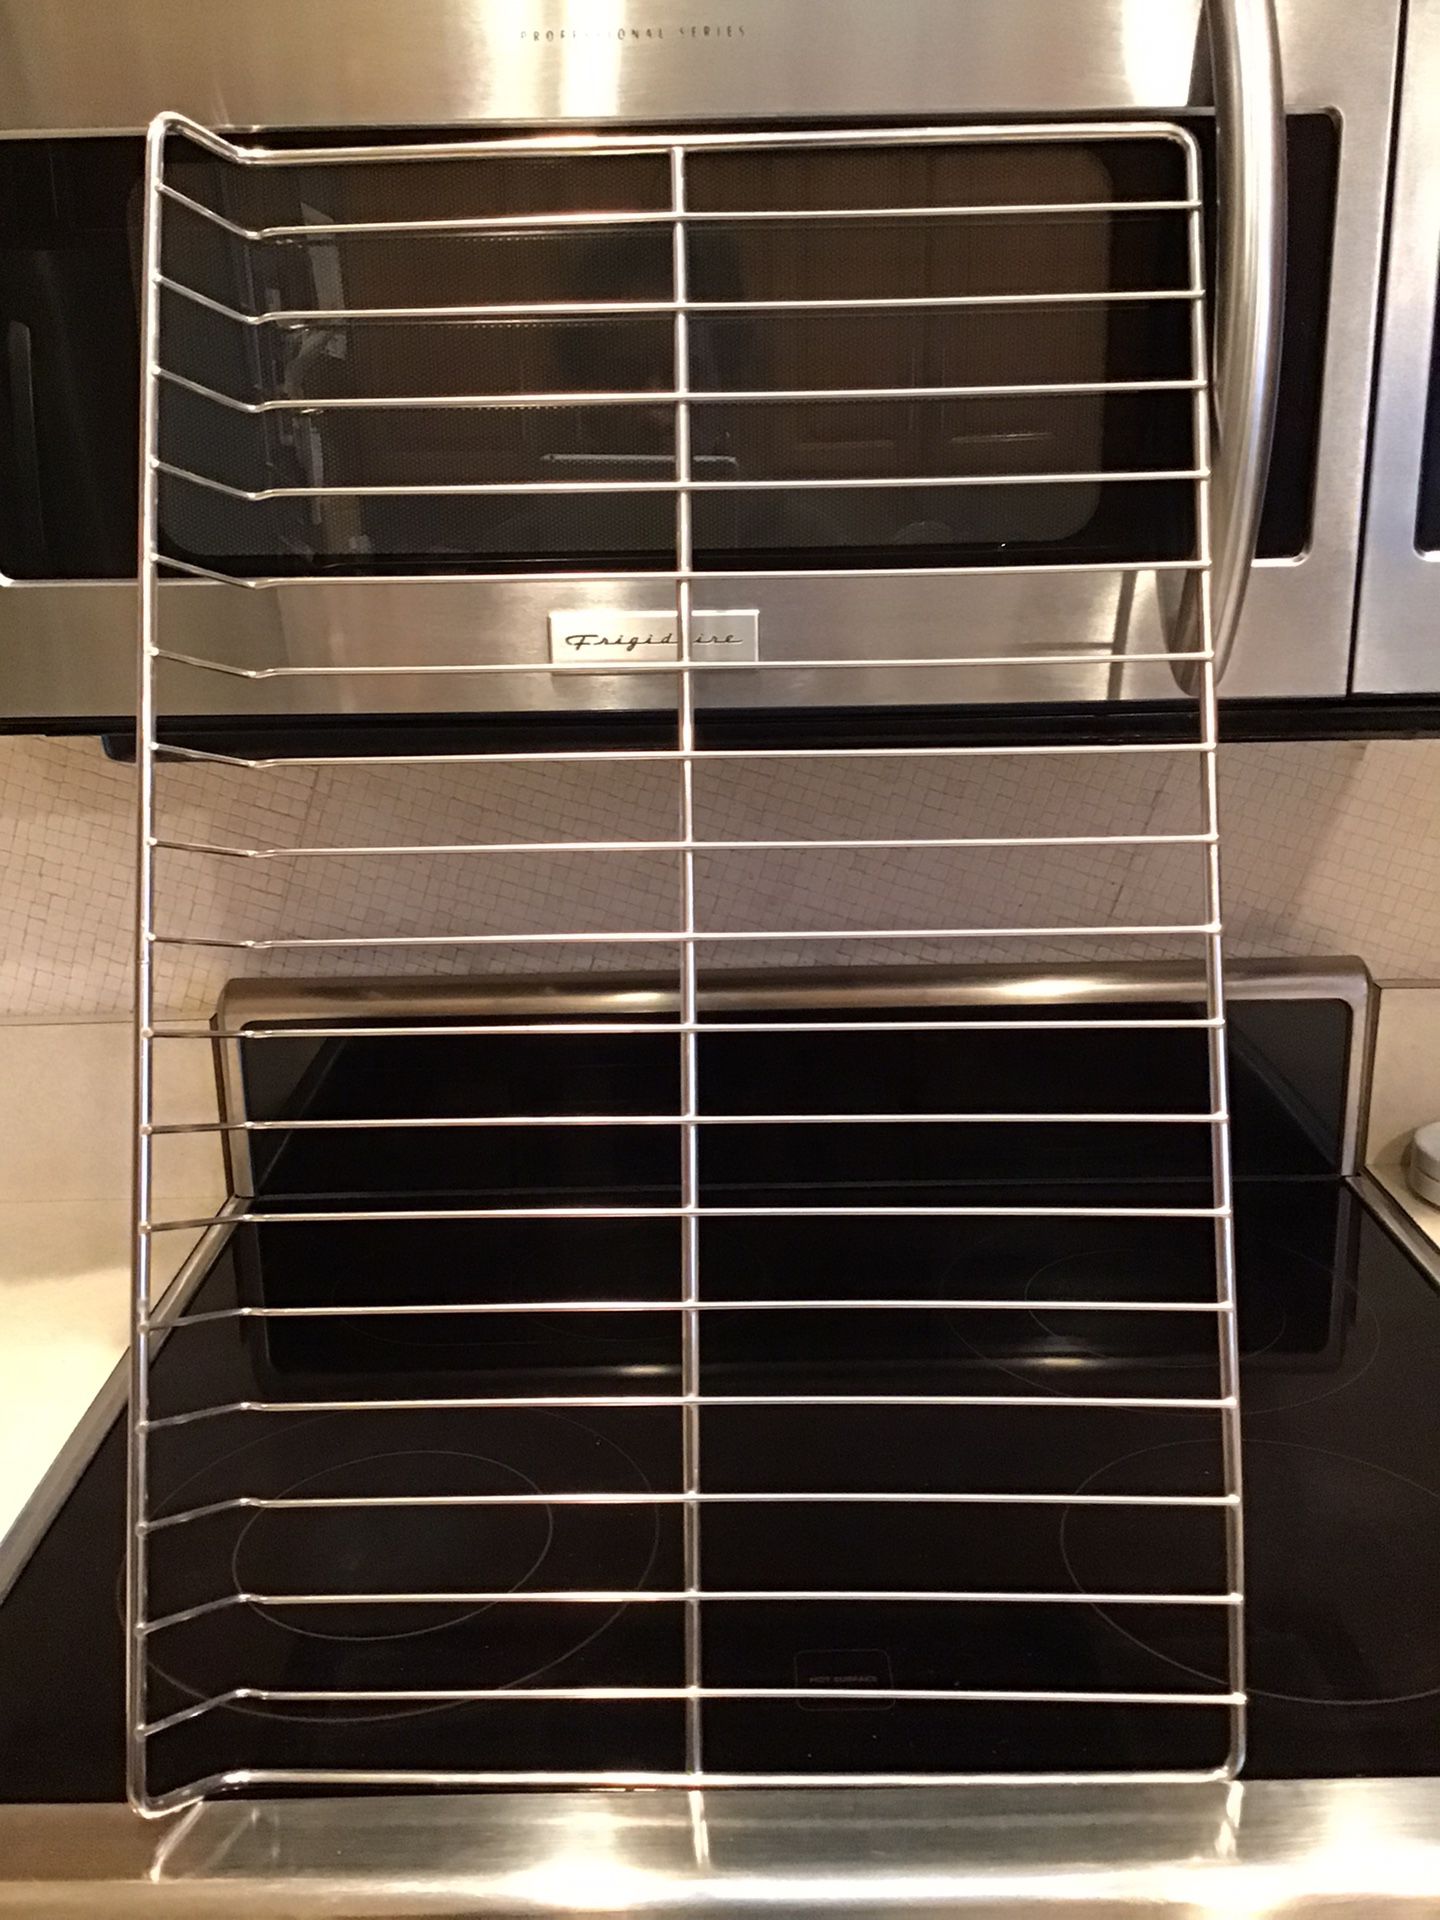 Oven GRILLE RACK